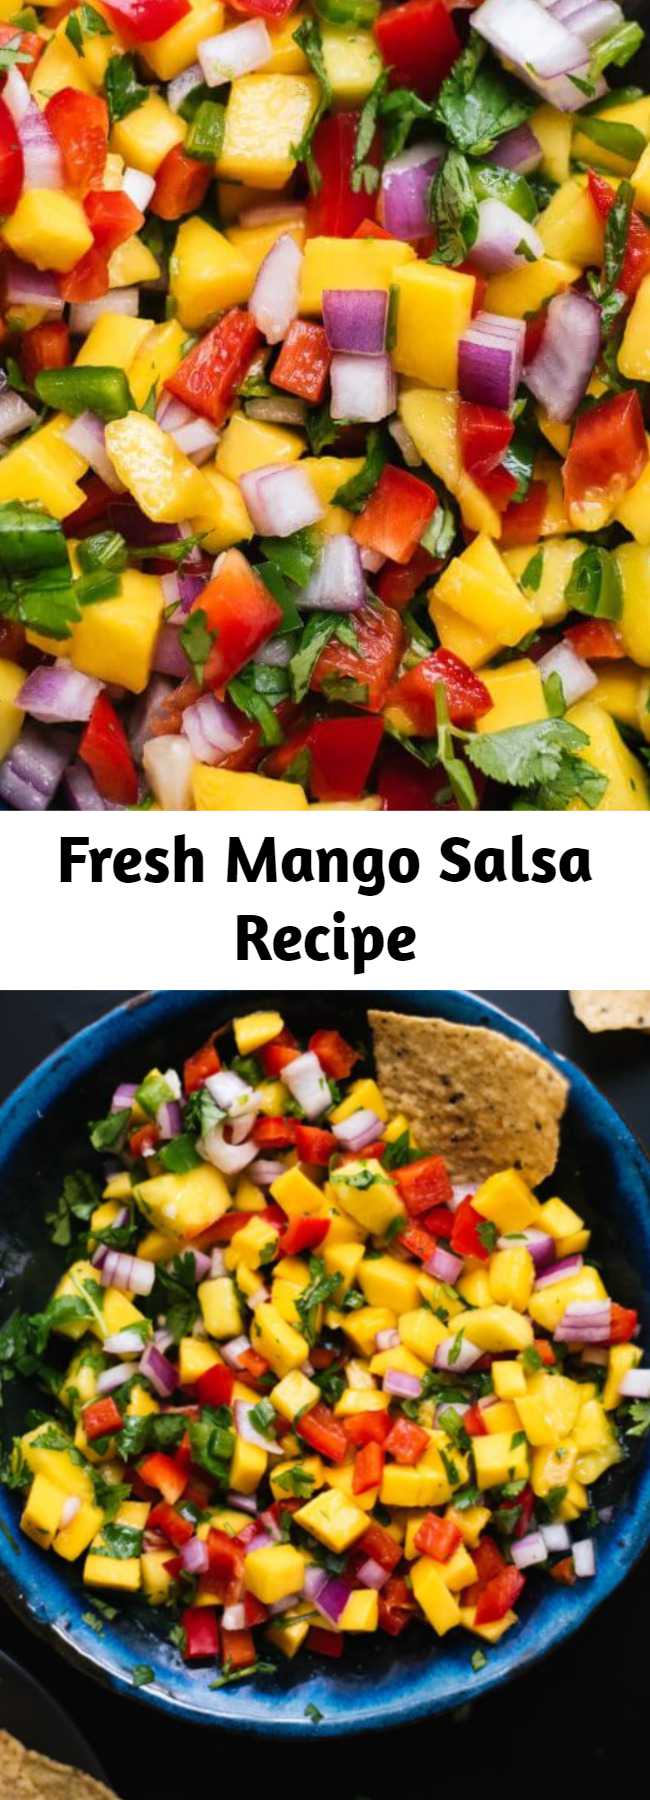 Fresh Mango Salsa Recipe - This simple and colorful mango salsa is super easy to make! It’s sweet, spicy and absolutely delicious. Serve this fresh mango salsa with chips, on tacos or salads, or as a salad itself. It’s that good. Recipe yields about 3 cups salsa.